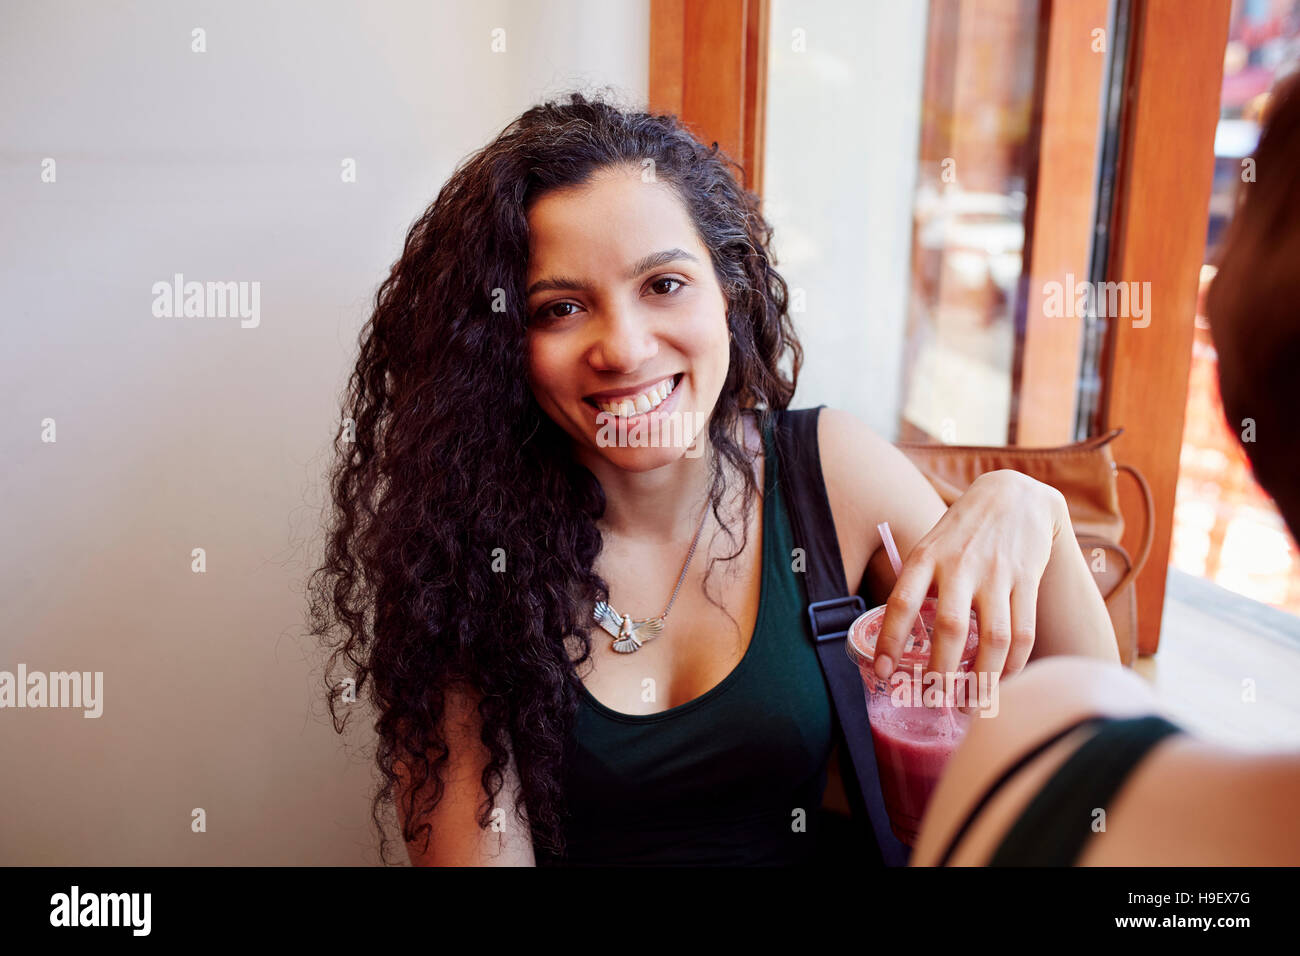 Smiling Black woman drinking smoothie in cafe Stock Photo